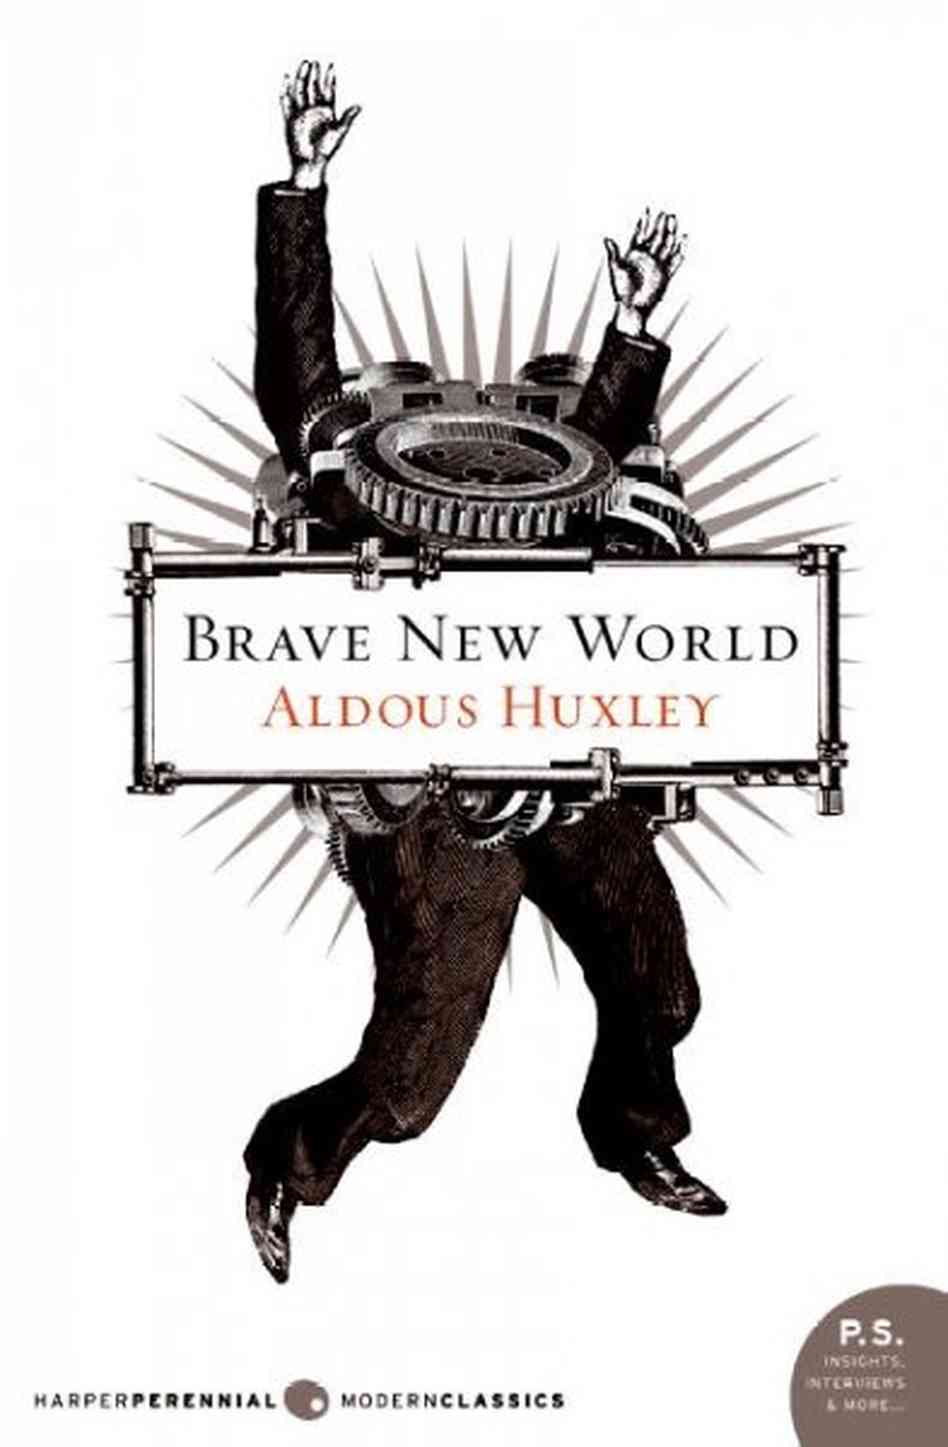 In The Society Of Brave New World